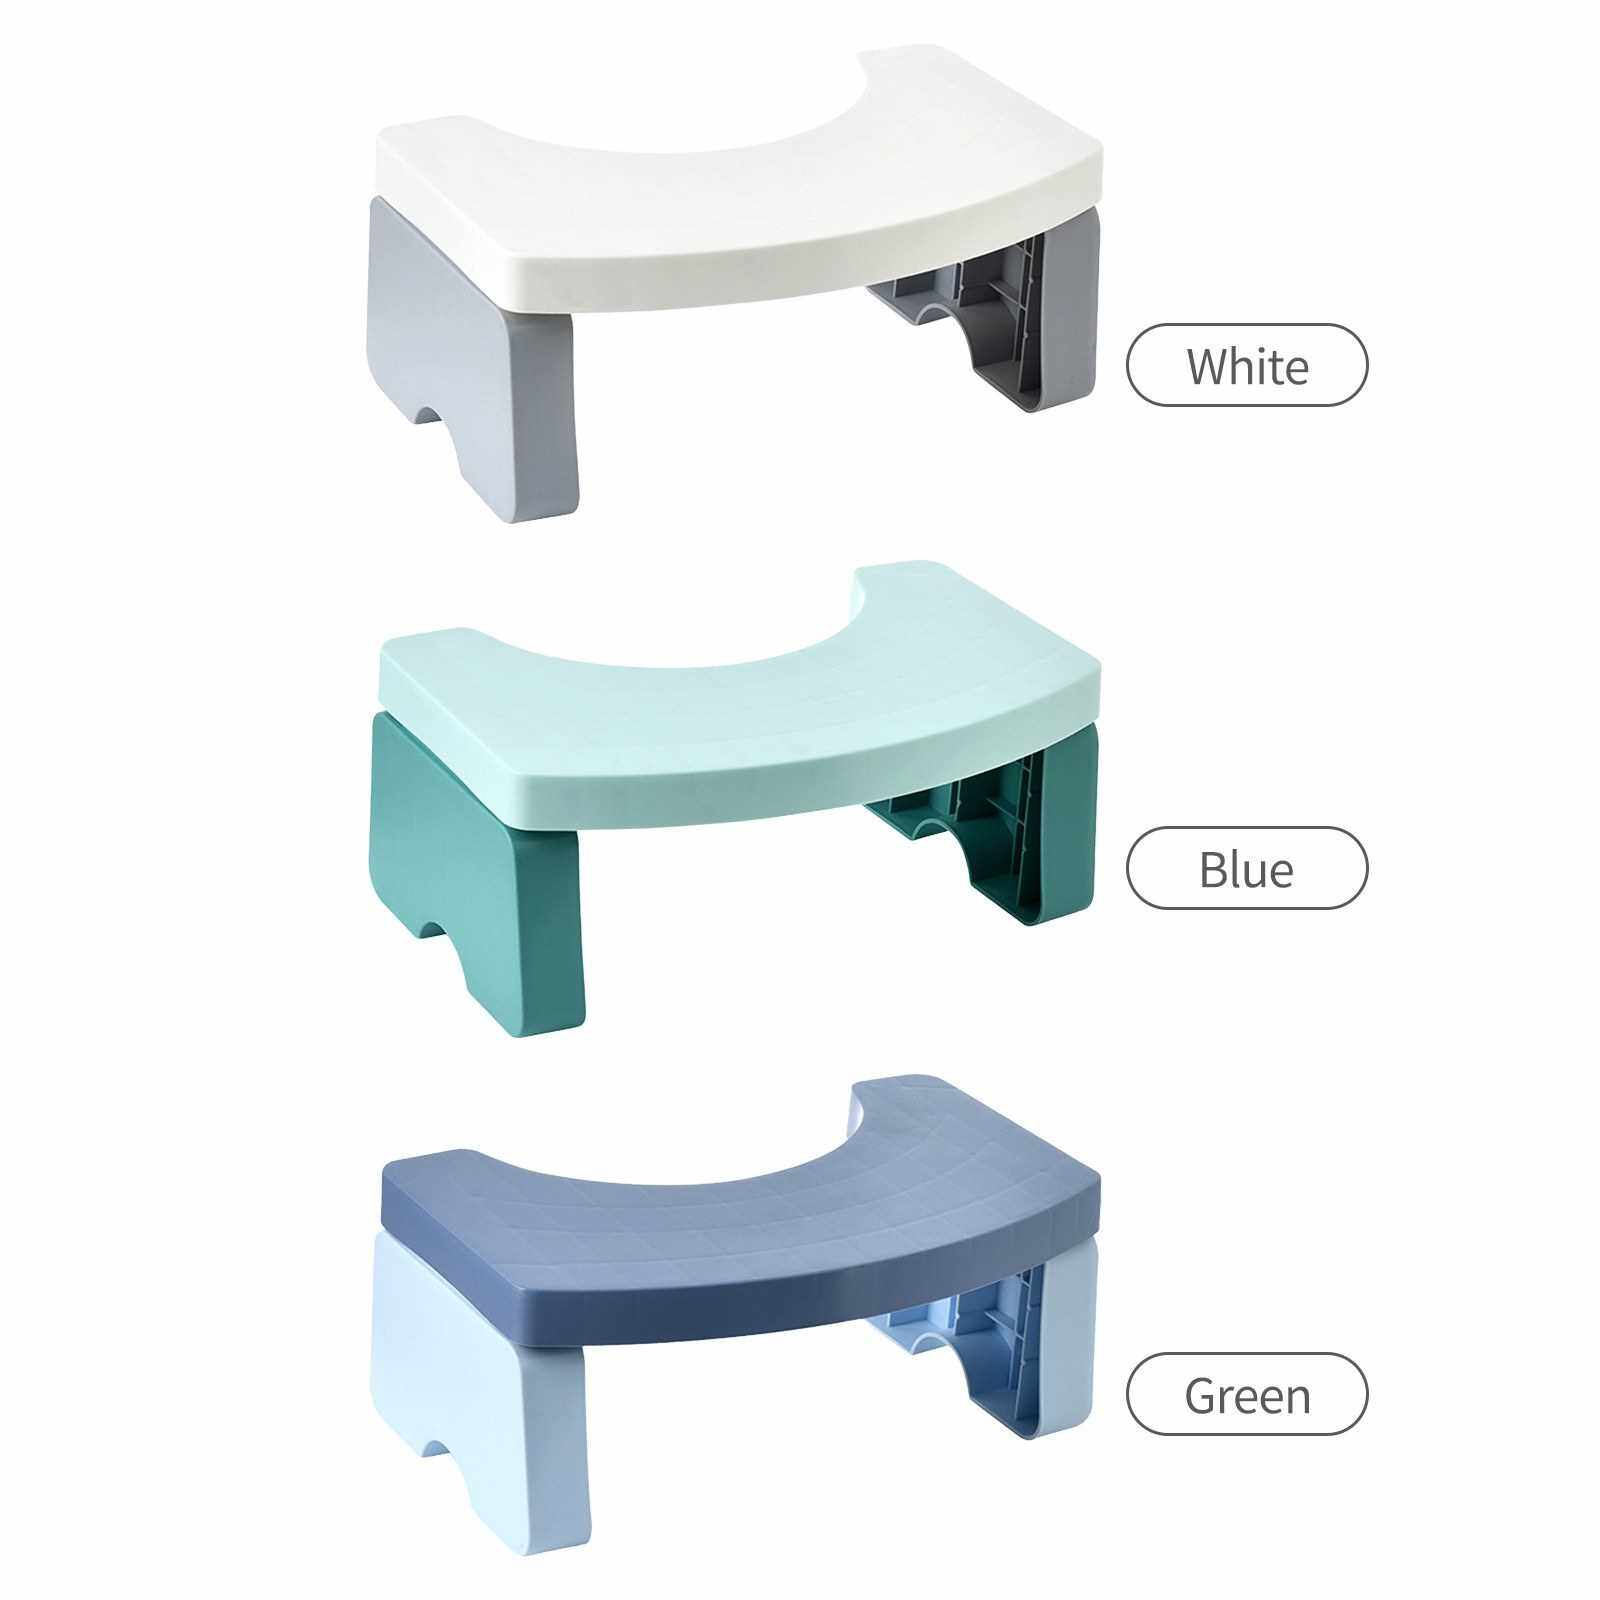 BEST SELLER Detachable Toilet Stool with Non-Slip Base Splicable Potty Step Stool Sitting Posture Foot Stool Bathroom Toilet Potty Stool for Kids Adults Pregnant Woman (Blue)